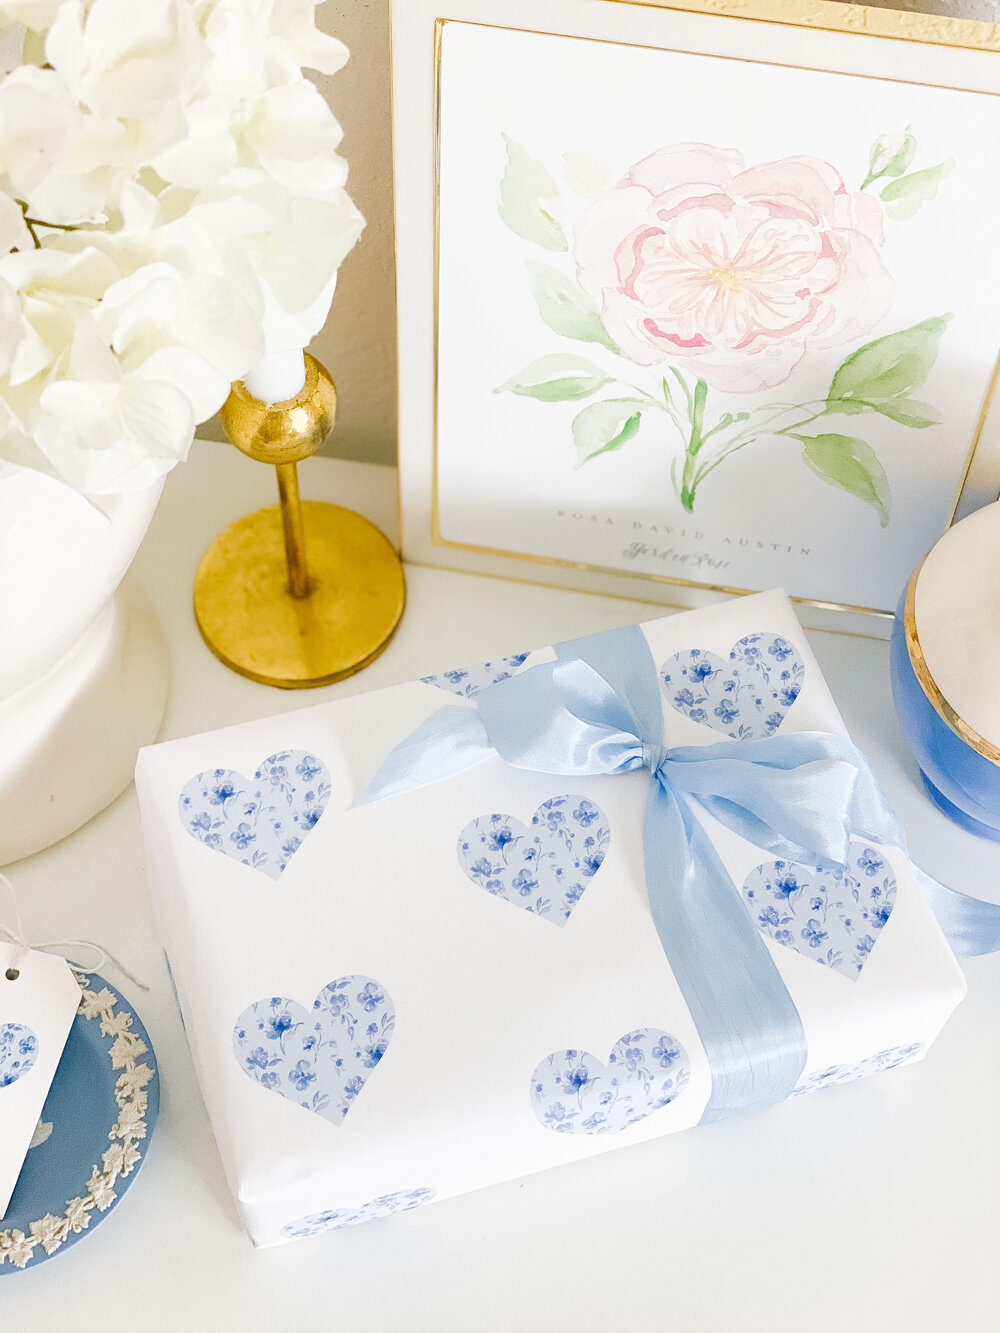 Easy heart print wrapping paper tutorial –